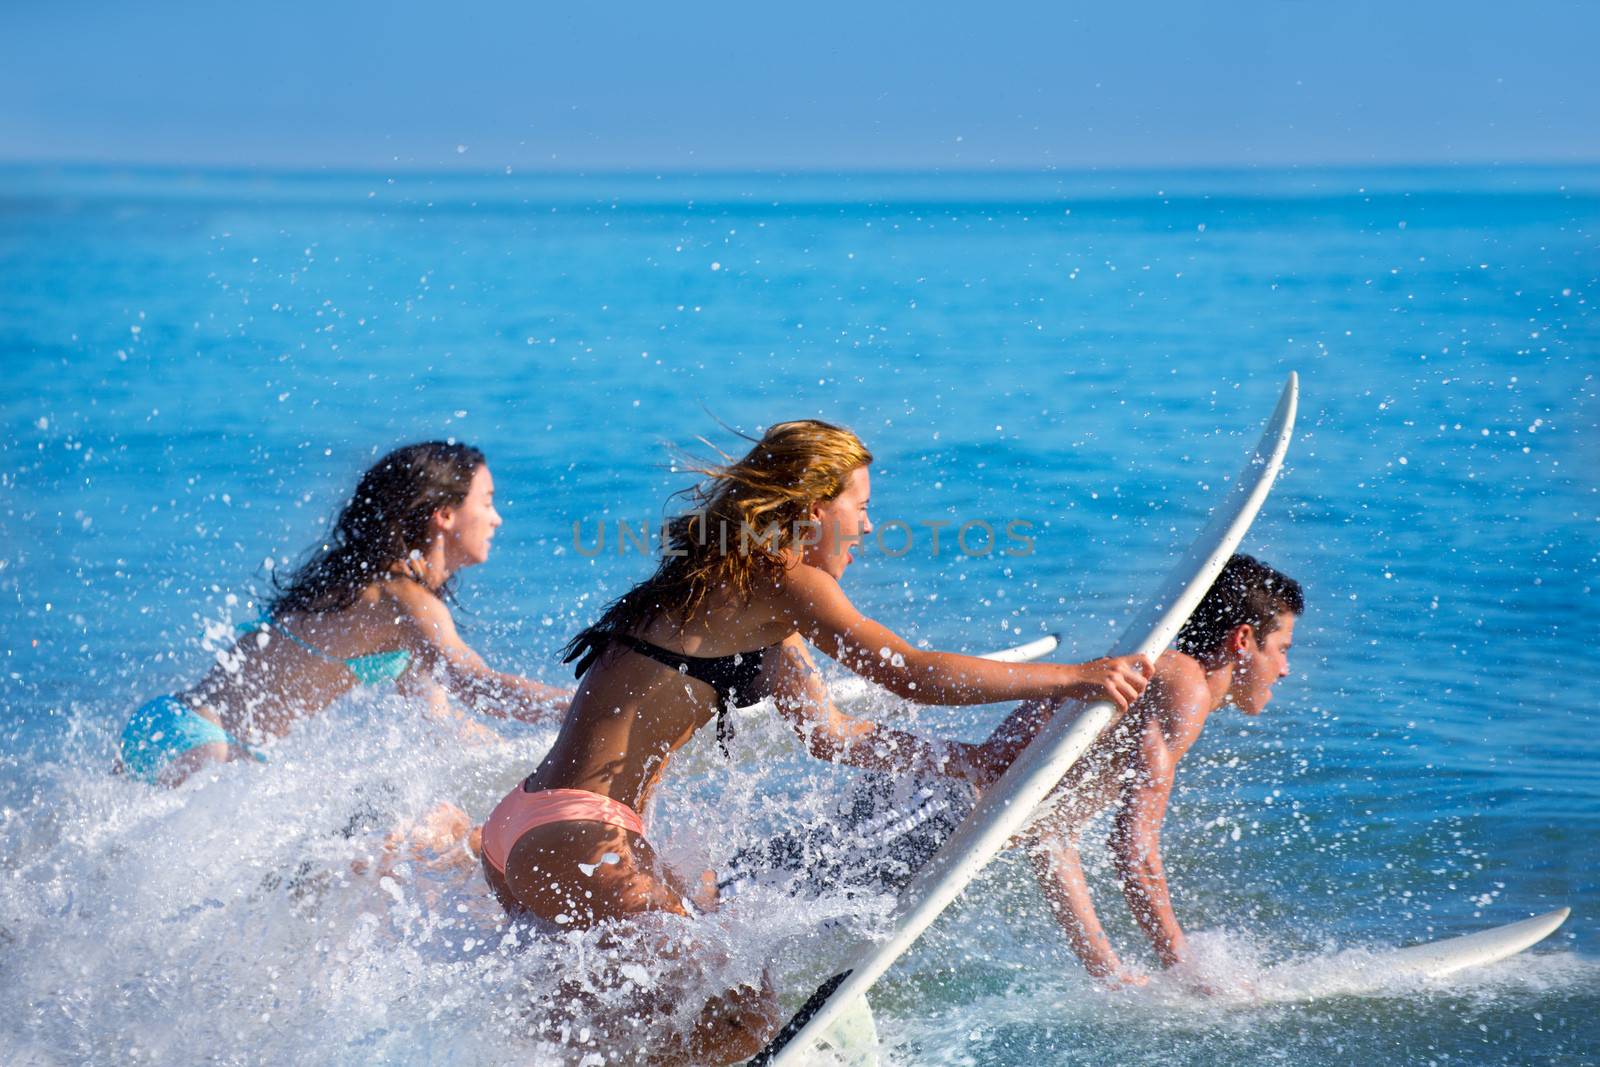 Boys and girls teen surfers surfing on surfboards by lunamarina